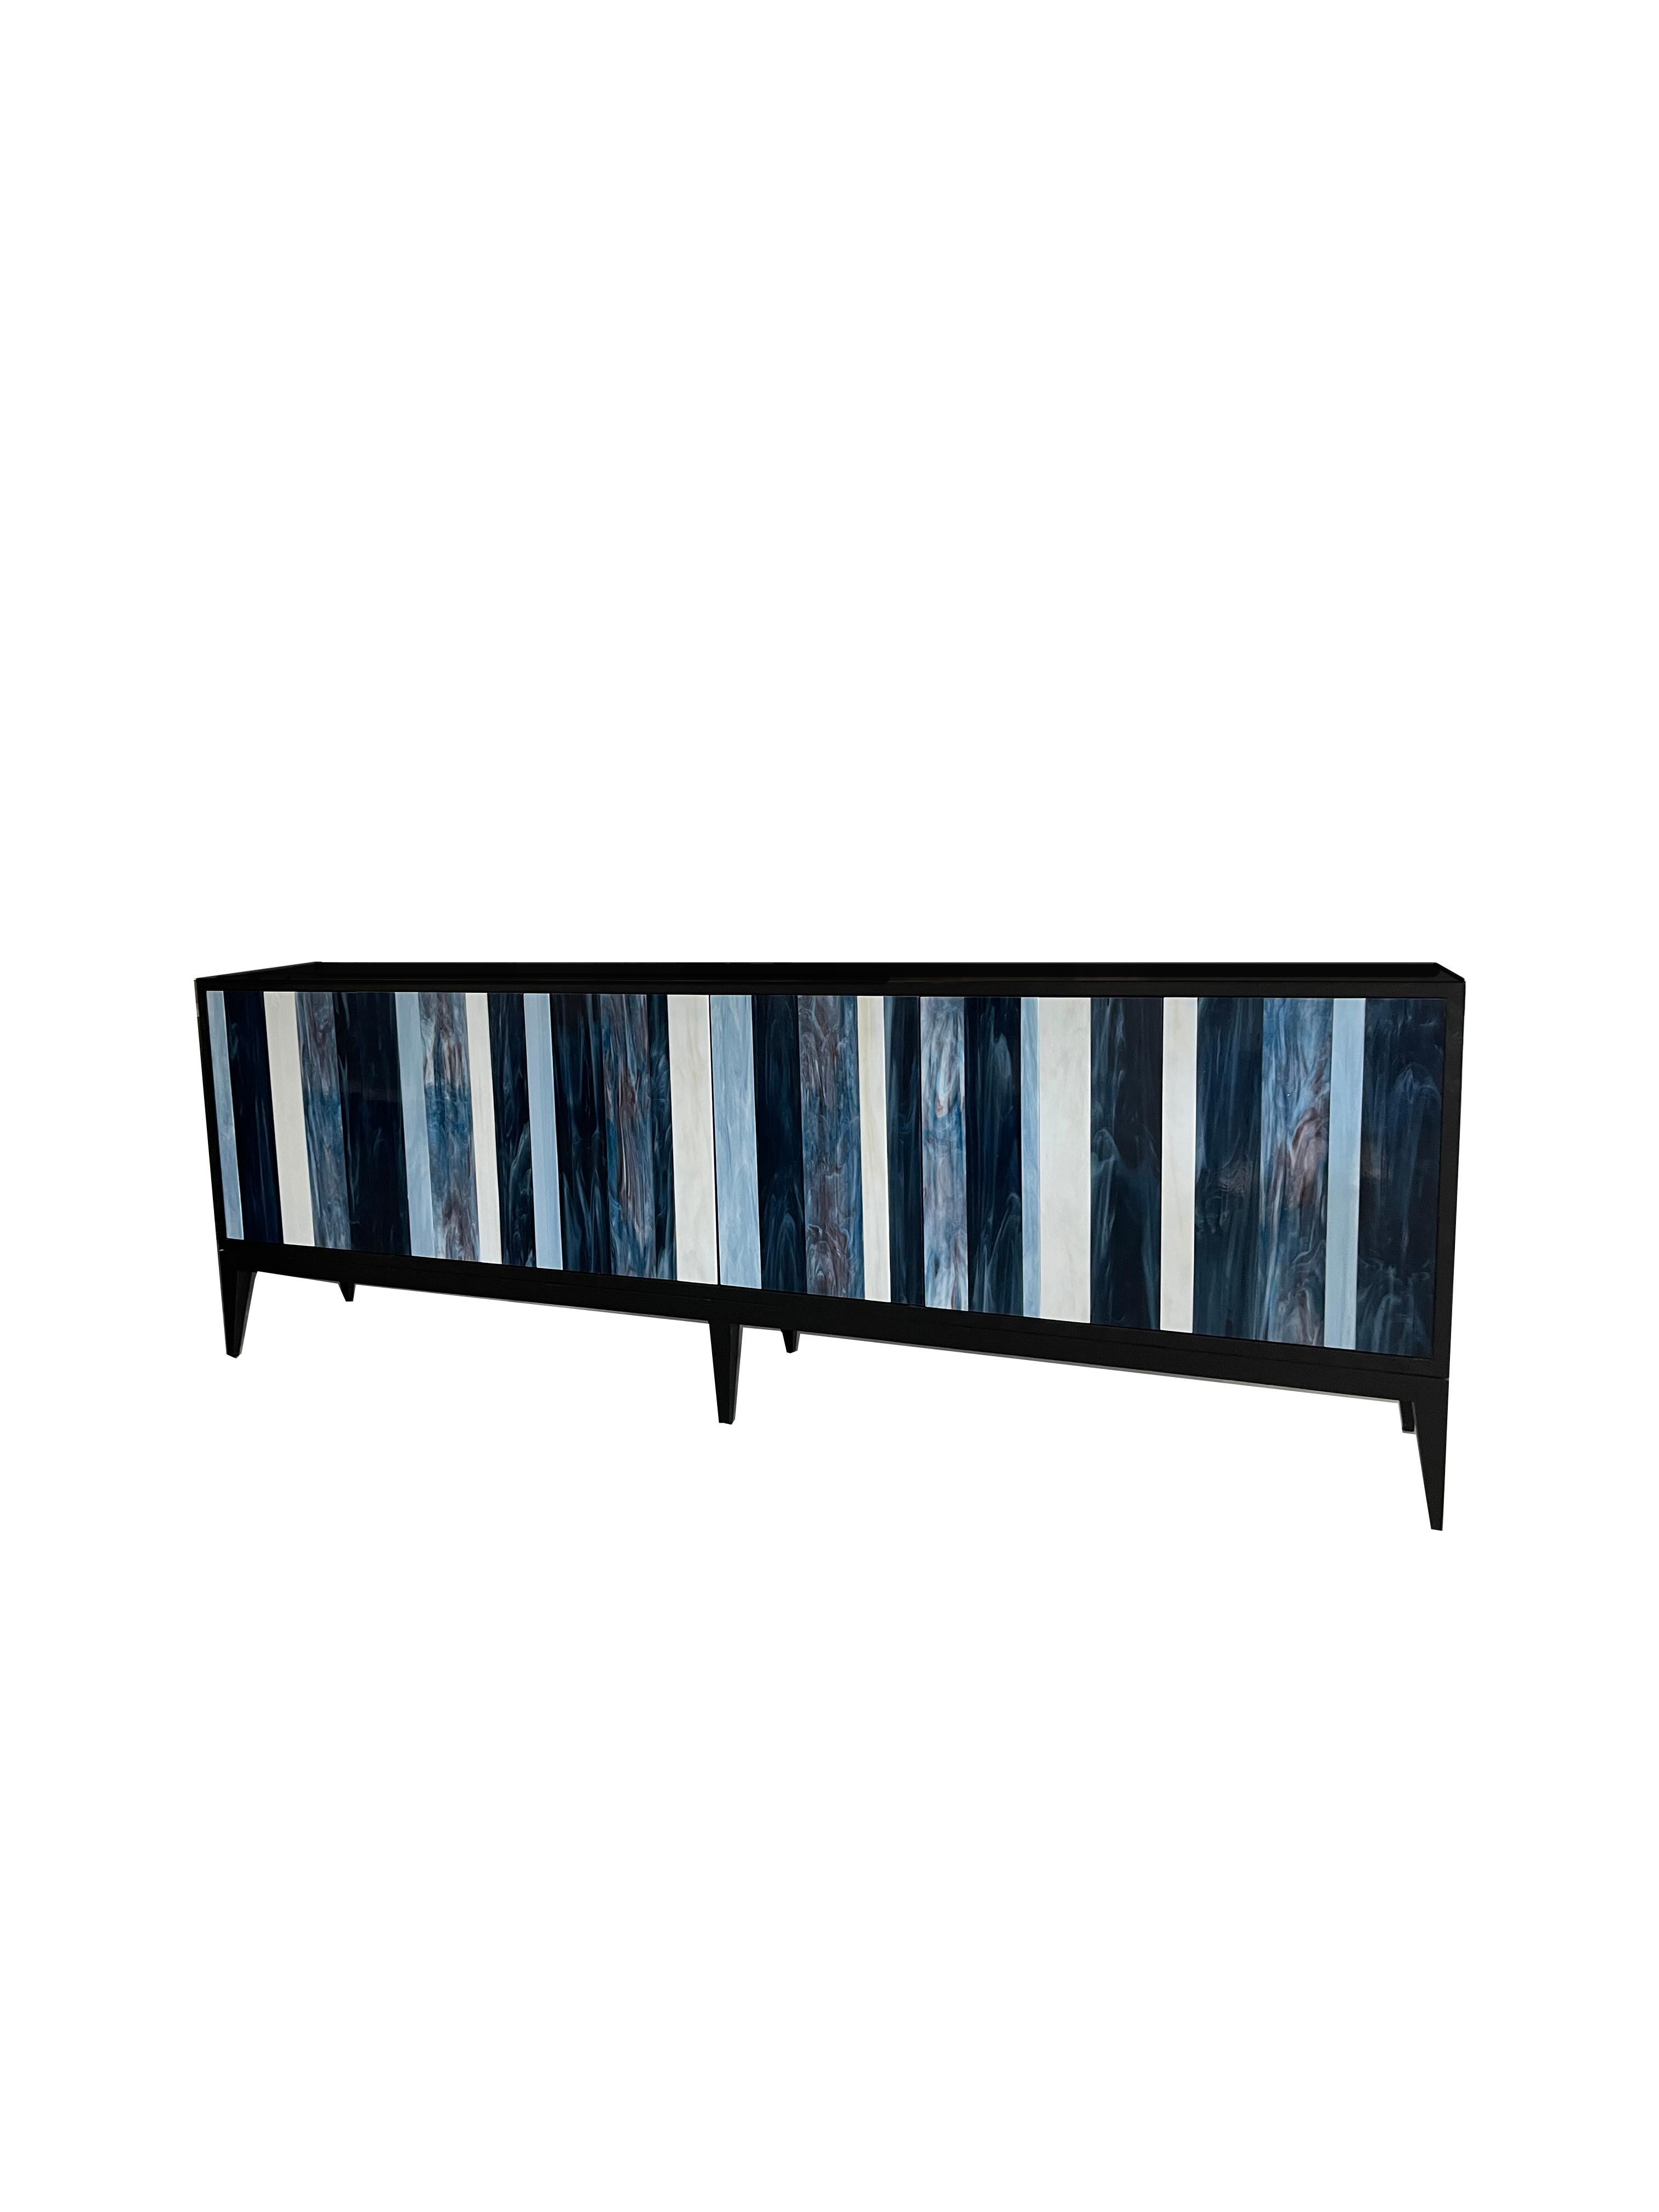 The Linea Milano buffet by Ercole home has a 6-door front, with rich dark Wenge wood finish.
Handcut glass stripes in ivory, French blue, electric blue, and cloudy notte decorate the surface of doors.
There is one adjustable interior shelf with